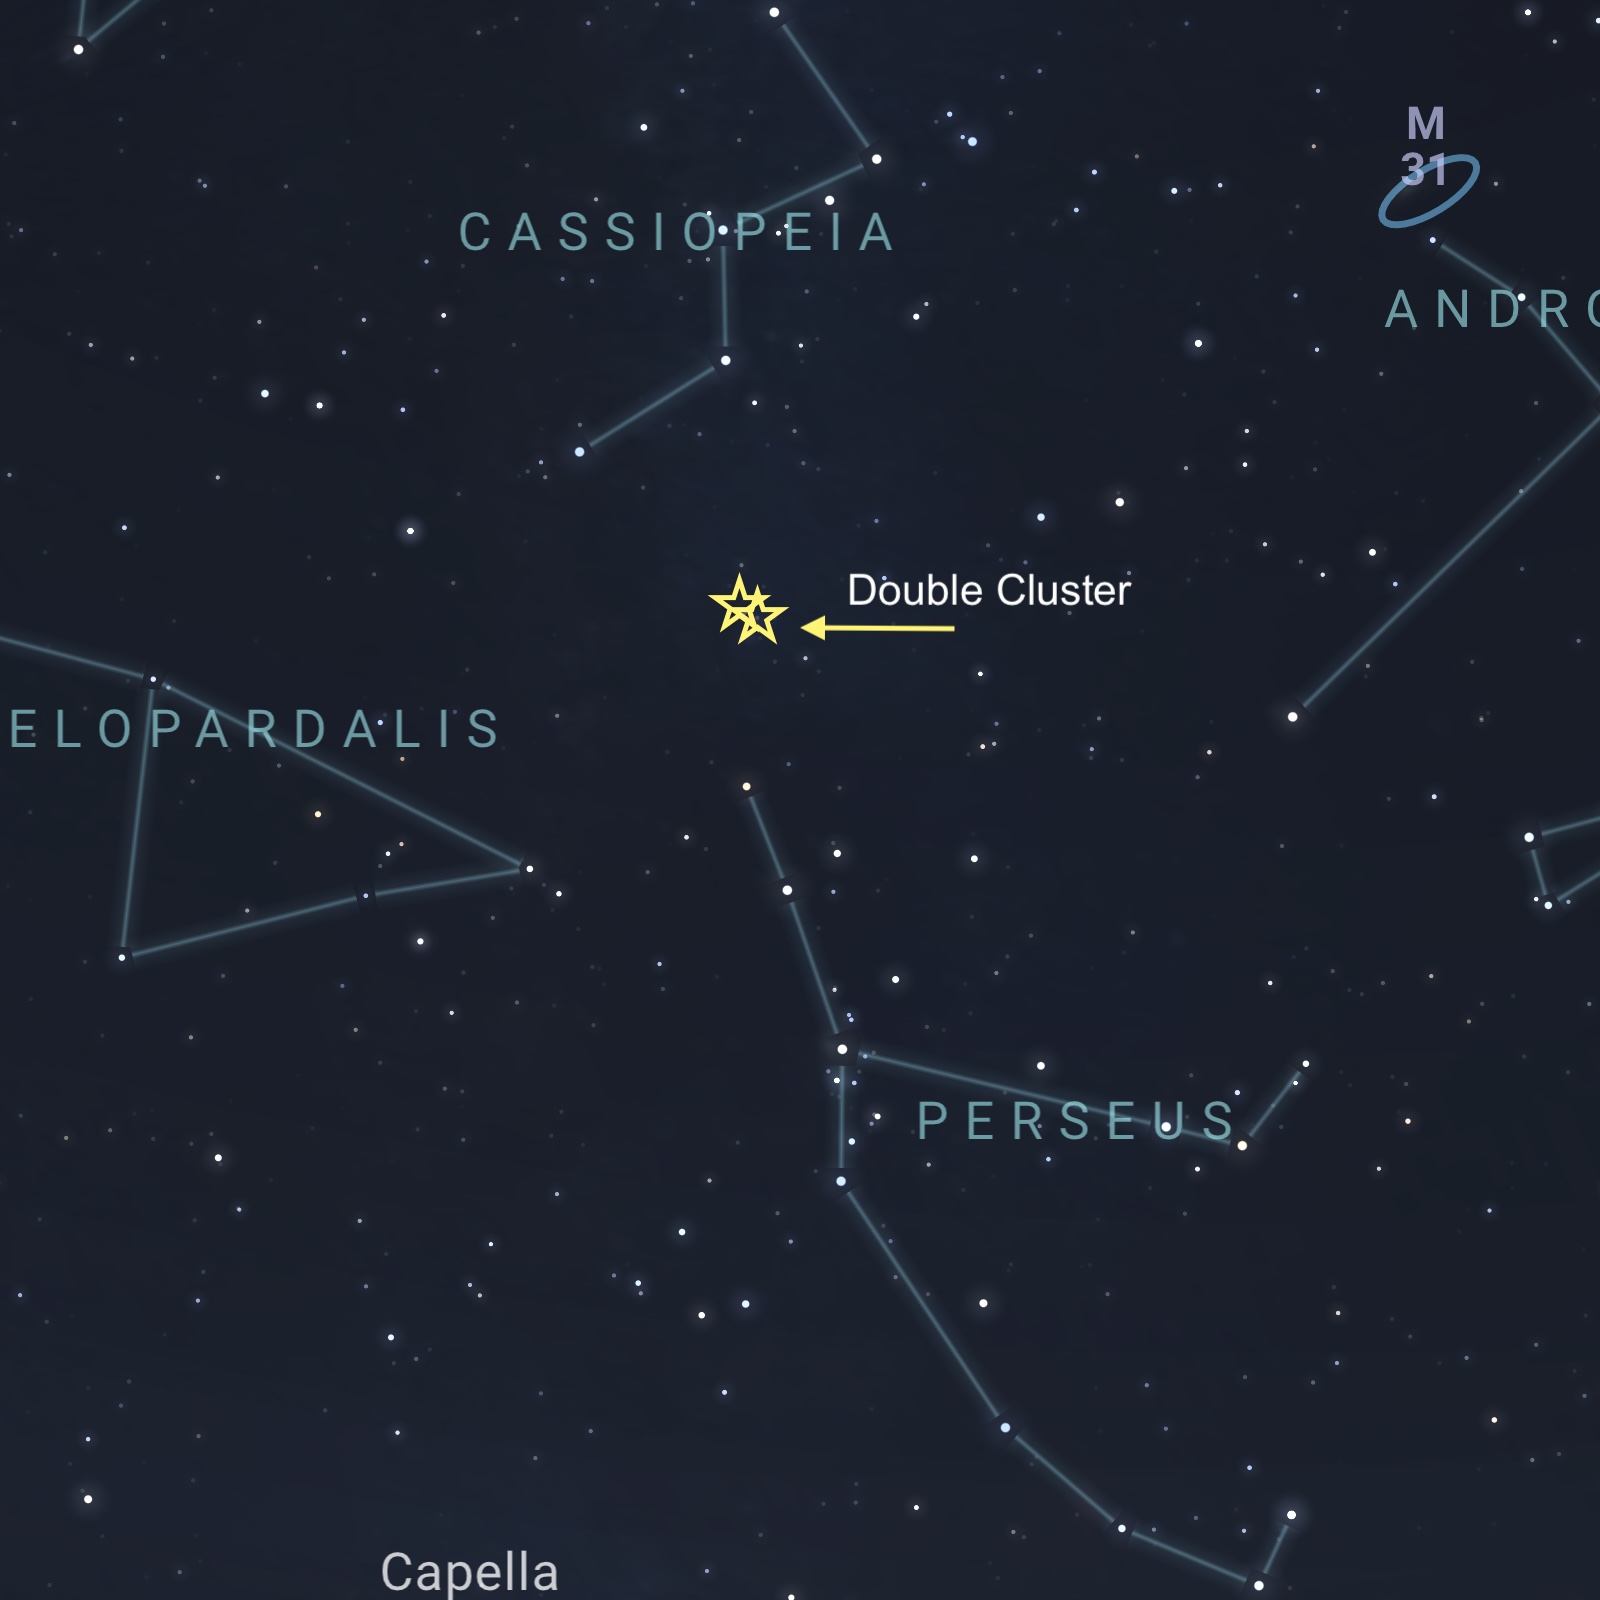 Star chart showing location of the Perseus Double Cluster between Cassiopeia and Perseus.